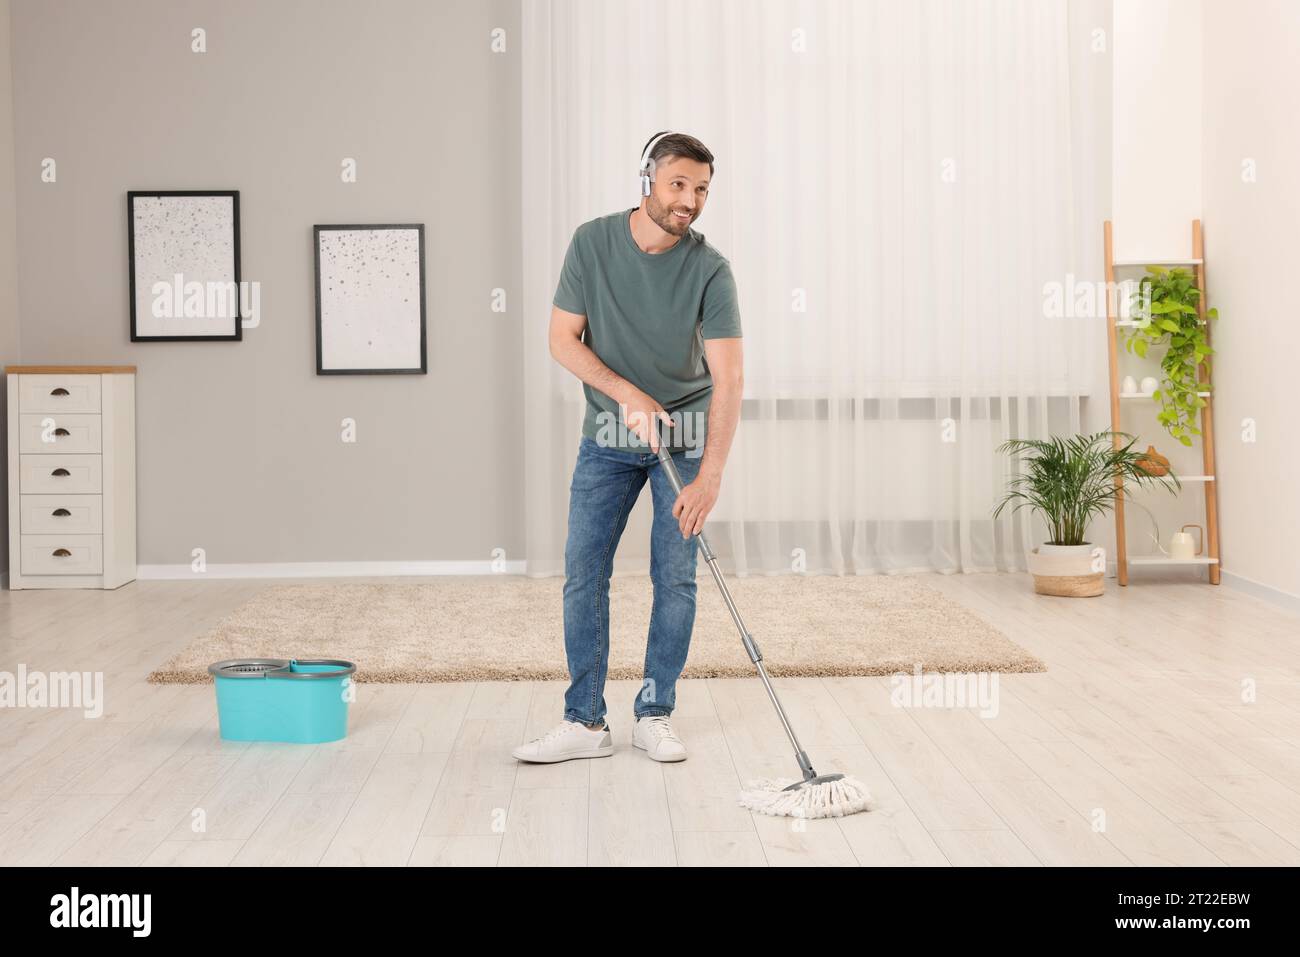 https://c8.alamy.com/comp/2T22EBW/enjoying-cleaning-man-in-headphones-listening-to-music-and-mopping-floor-at-home-2T22EBW.jpg